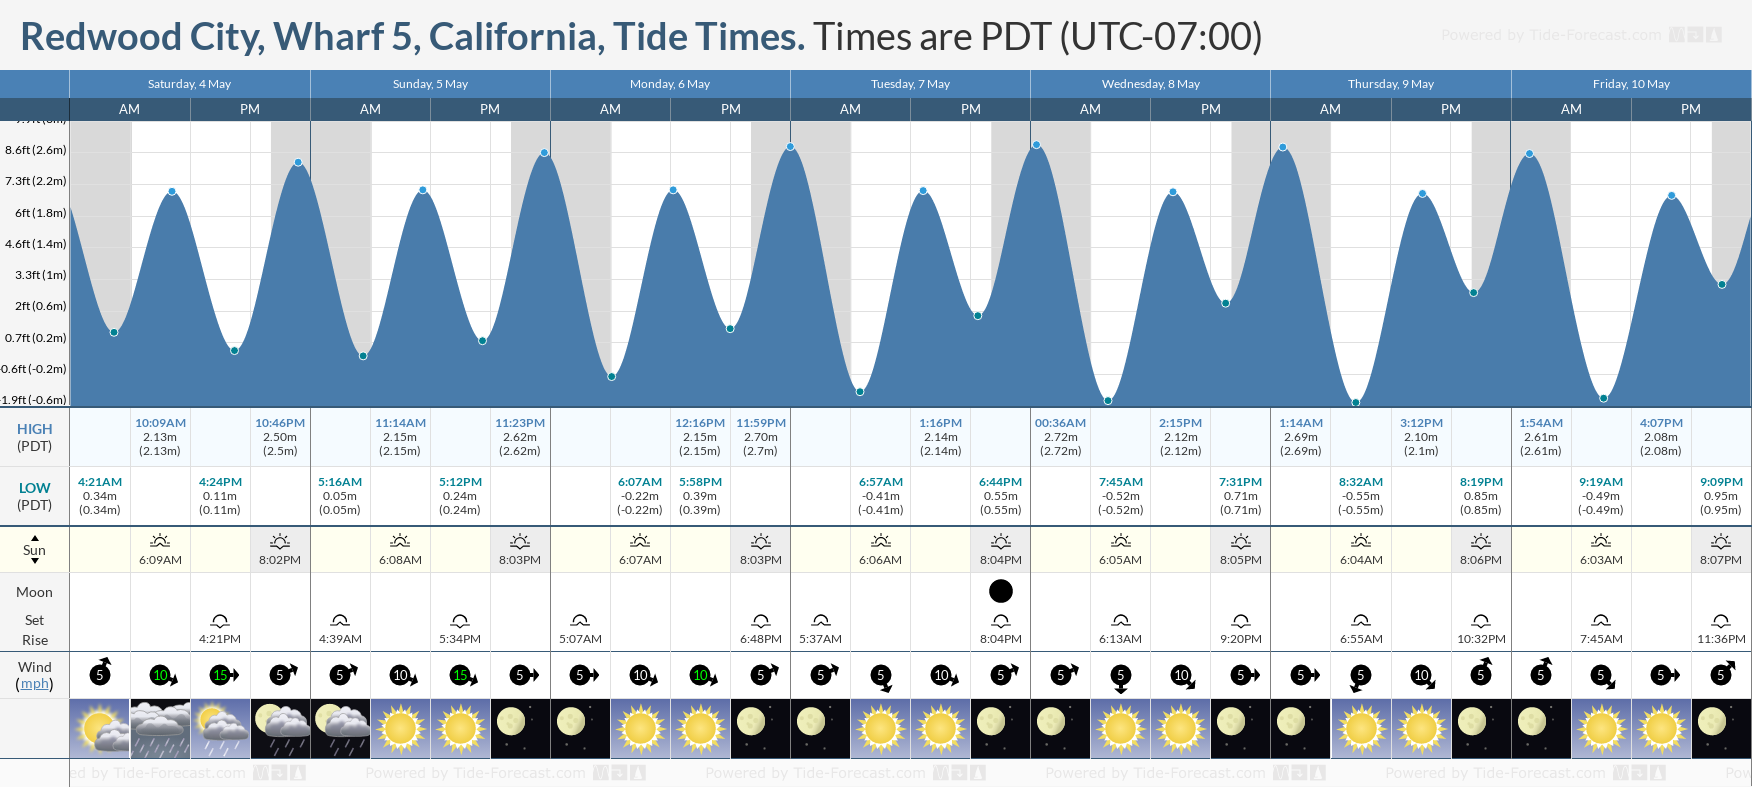 Redwood City, Wharf 5, California Tide Chart including high and low tide tide times for the next 7 days